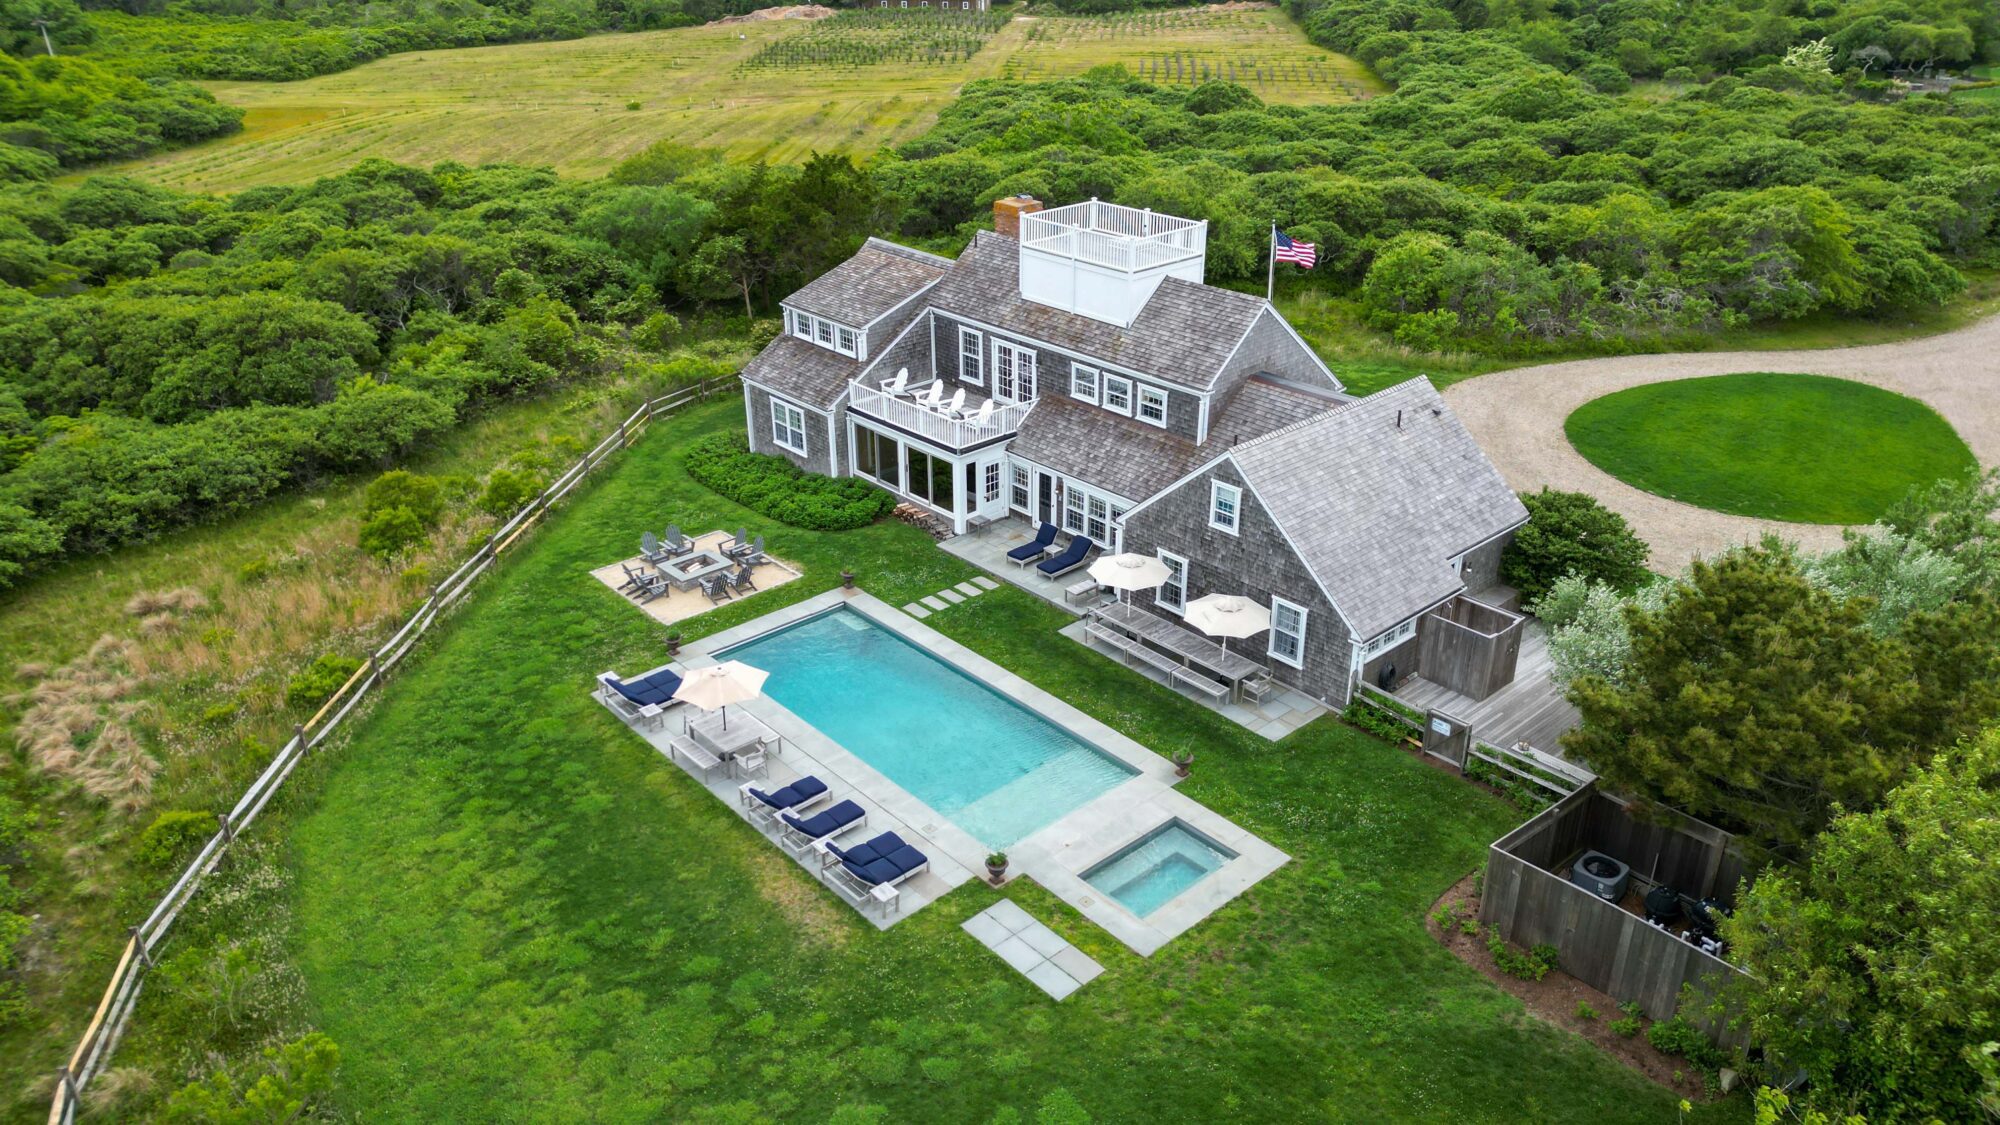 5-21 Quidnet Rd Nantucket Family Compound Tennis Pool Pickleball